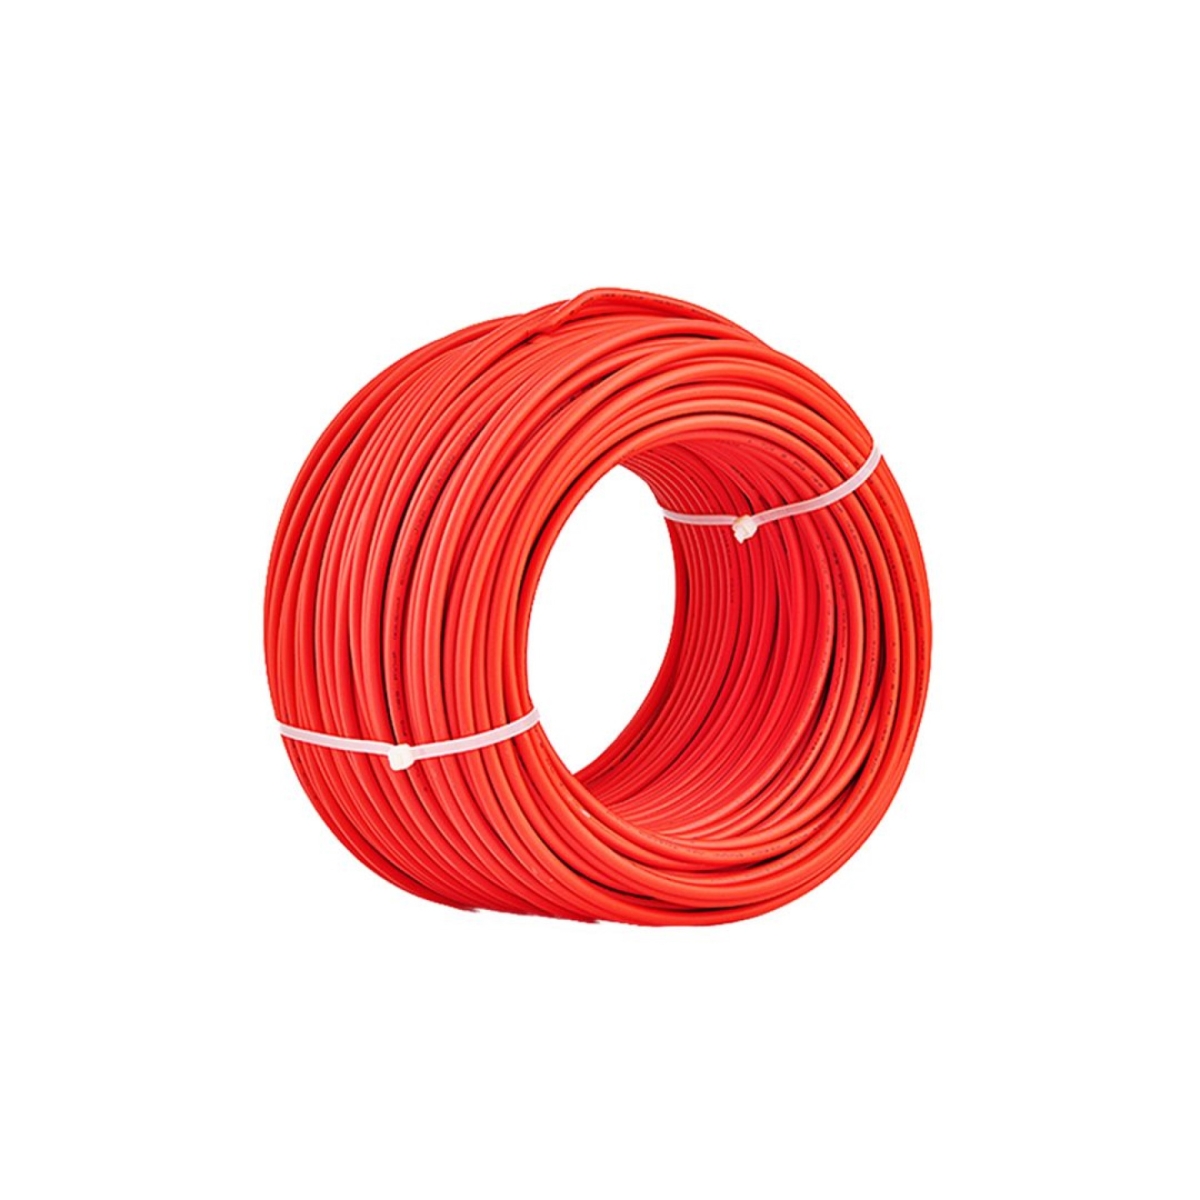 TommaTech 10.0mm Solar Cable PVI1-F Red